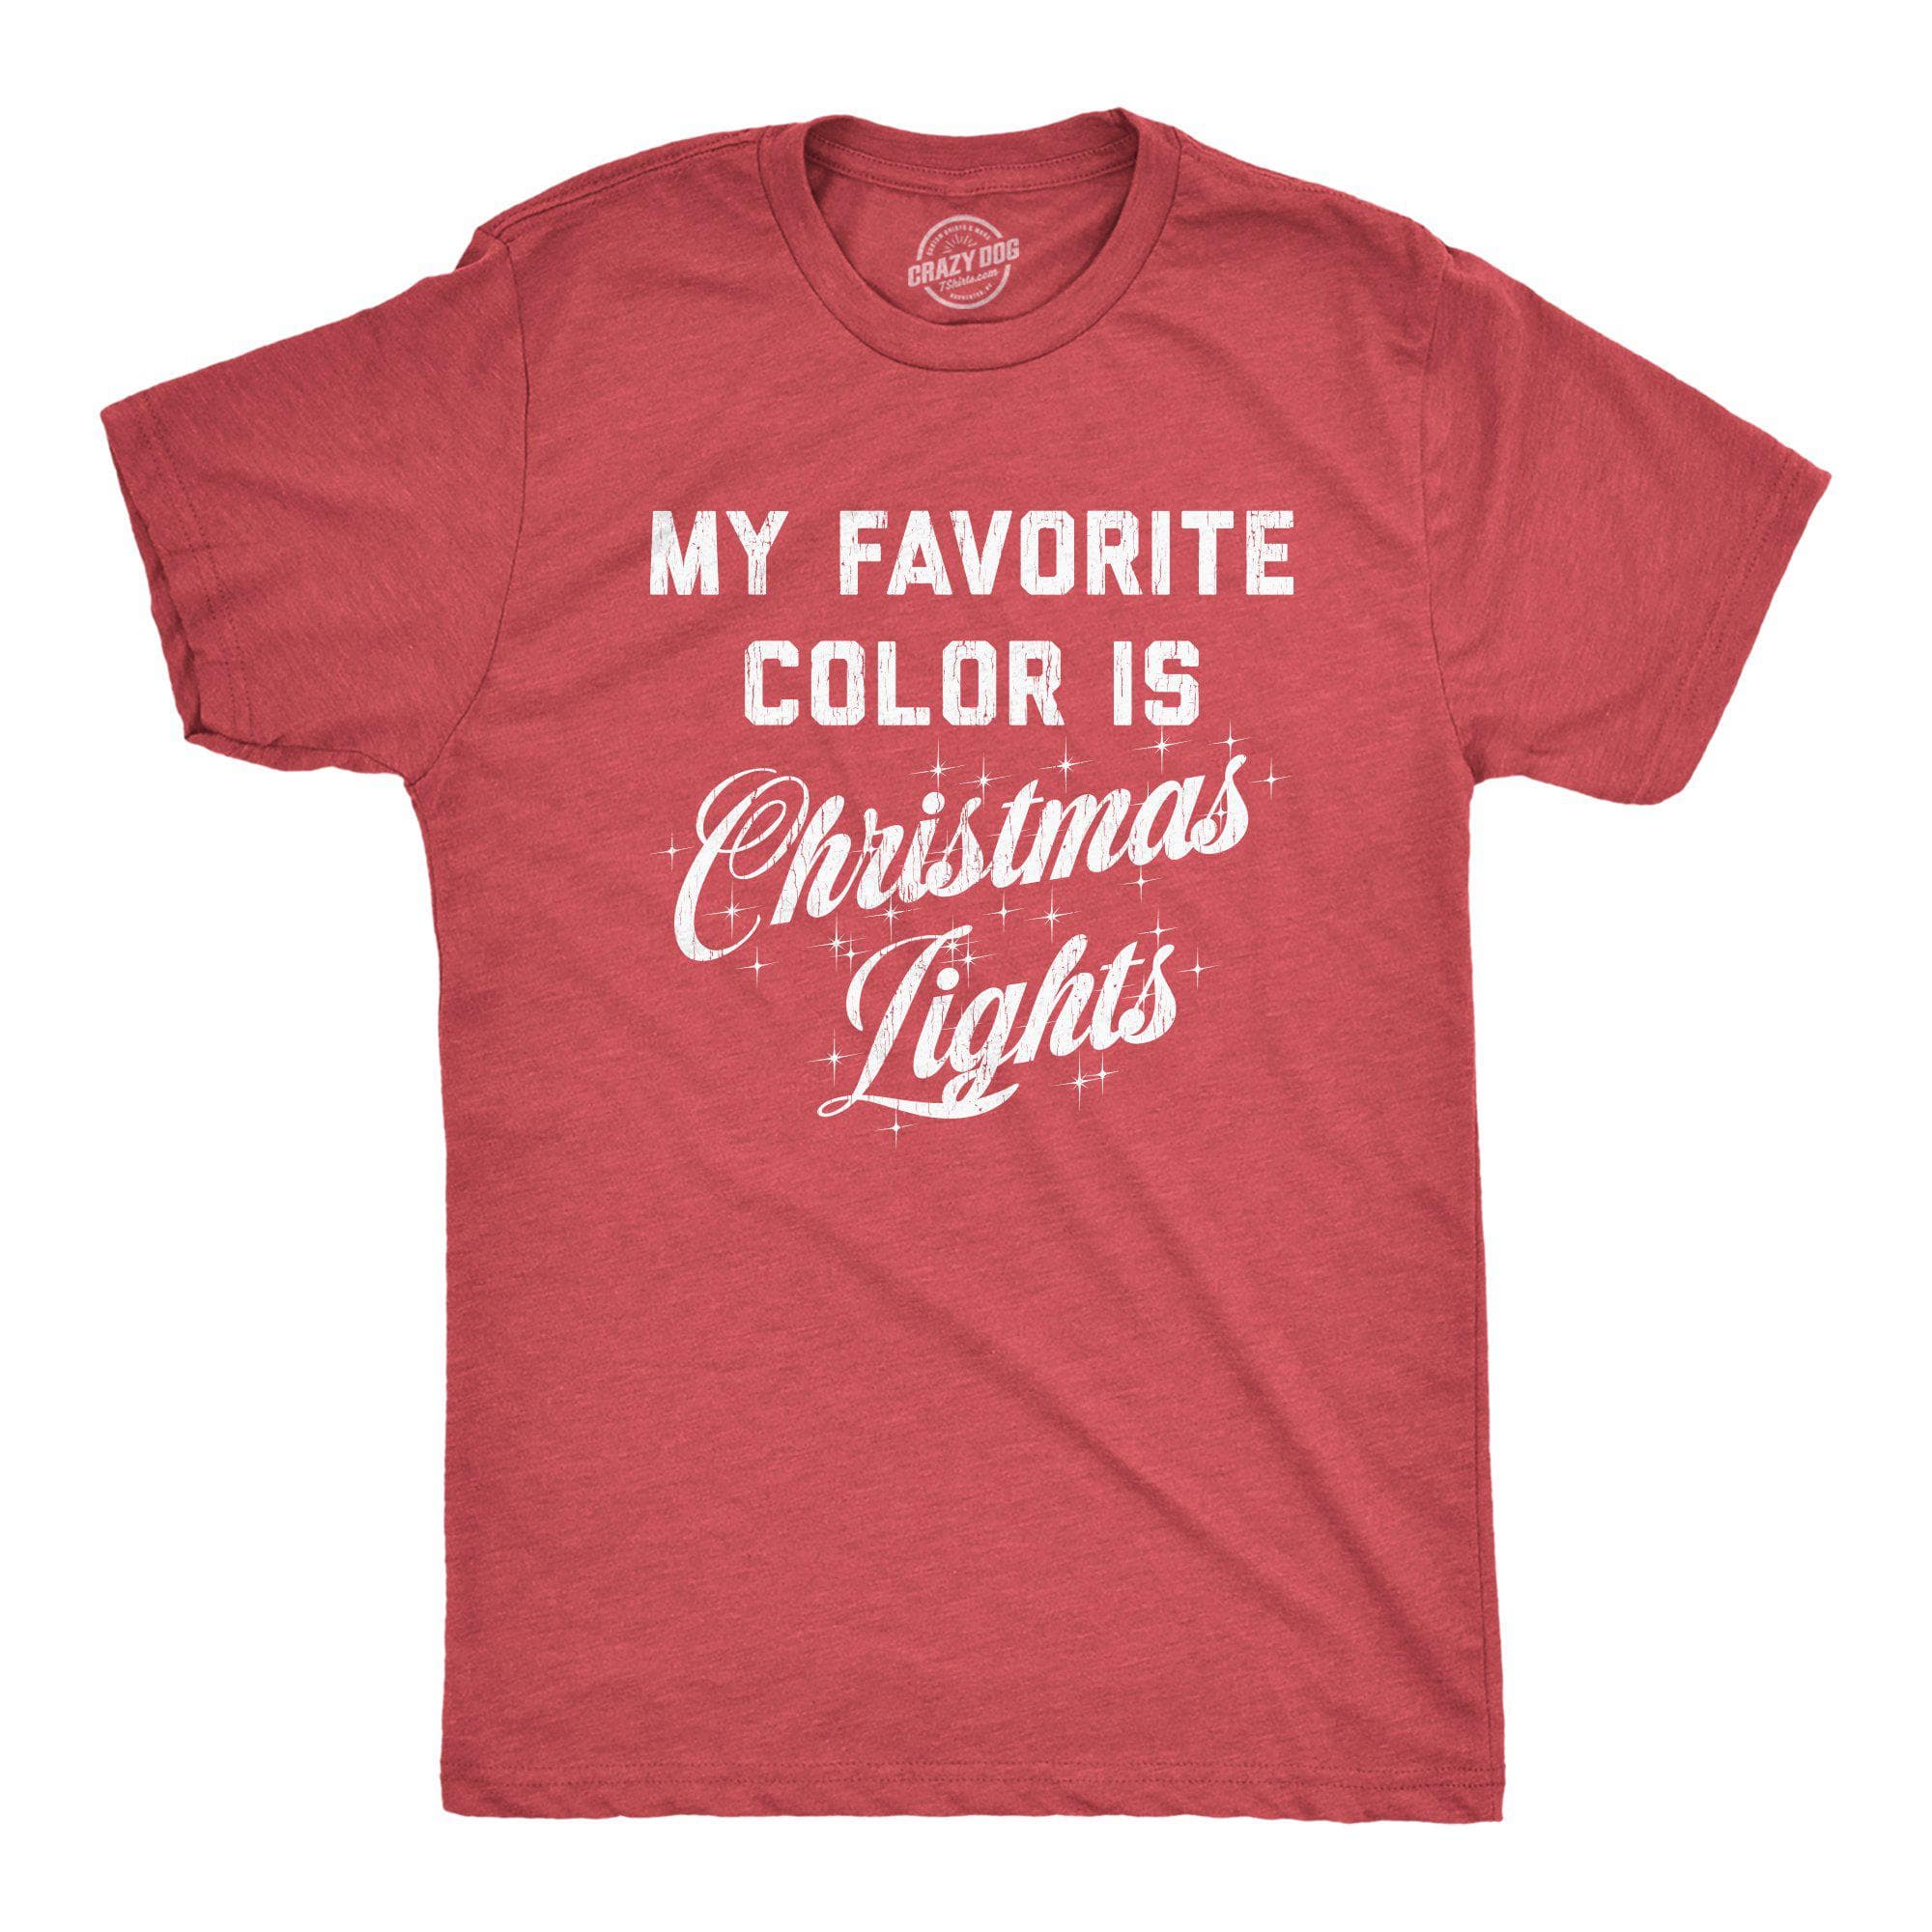 My Favorite Color Is Christmas Lights Men's Tshirt - Crazy Dog T-Shirts